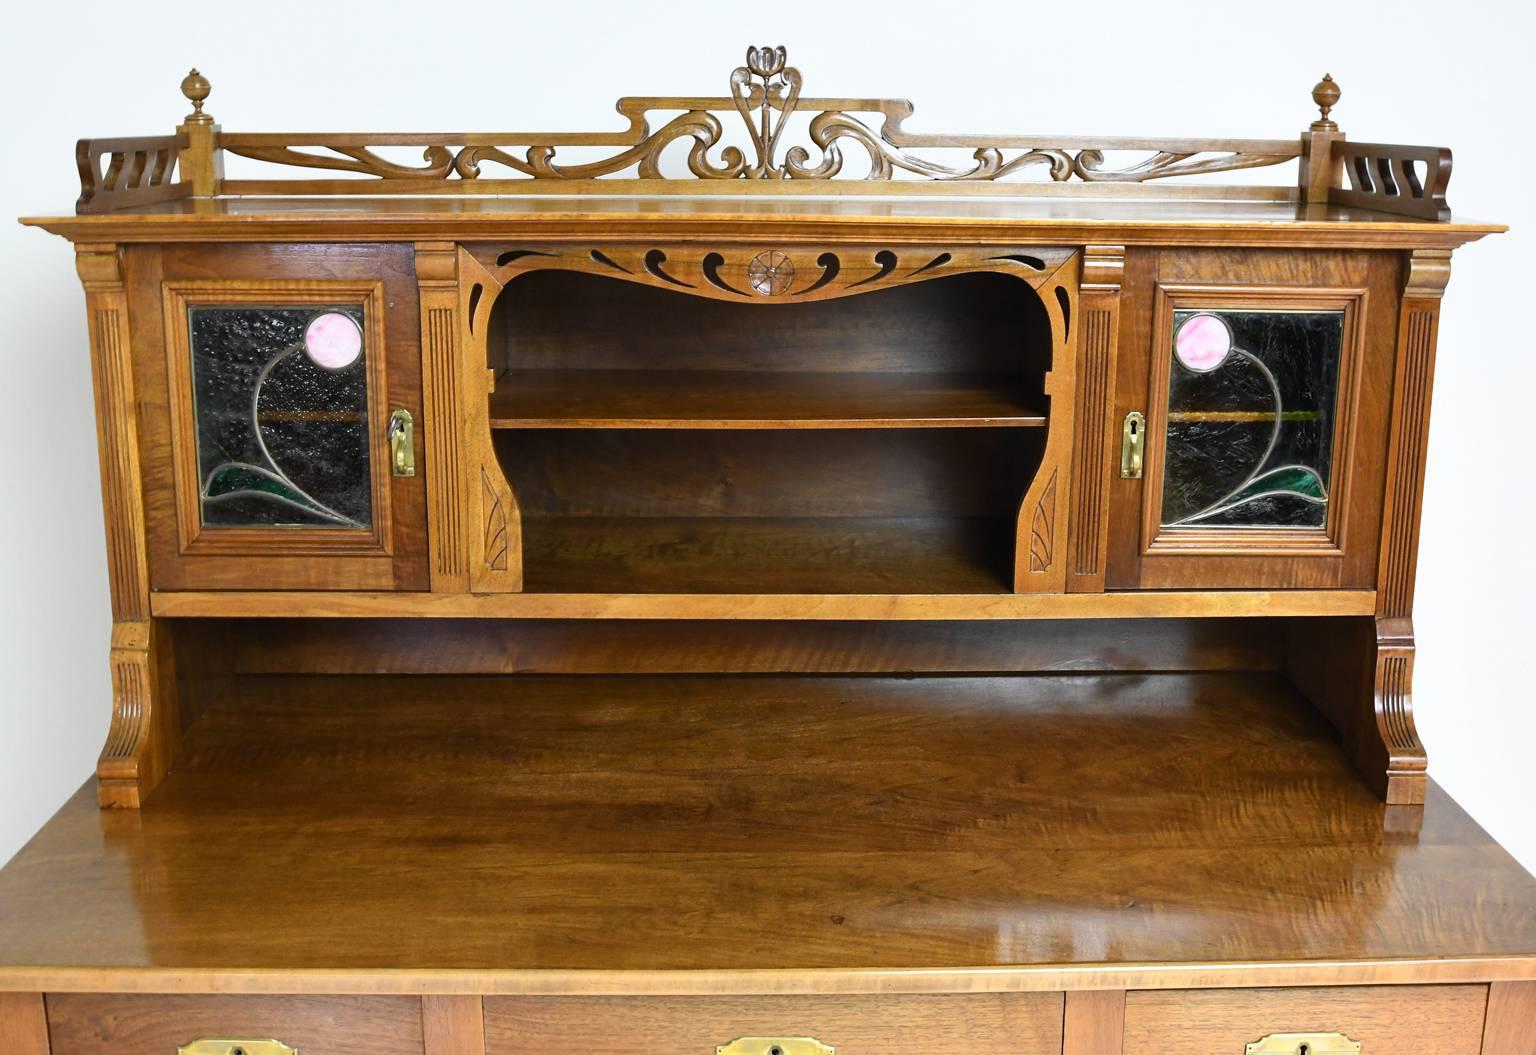 A beautiful Art Nouveau pedestal desk in walnut with cabinets at either side of knee-hole opening to offer six storage drawers, in addition to the three drawers along the apron. The small bookcase resting over the rear top features a gallery with